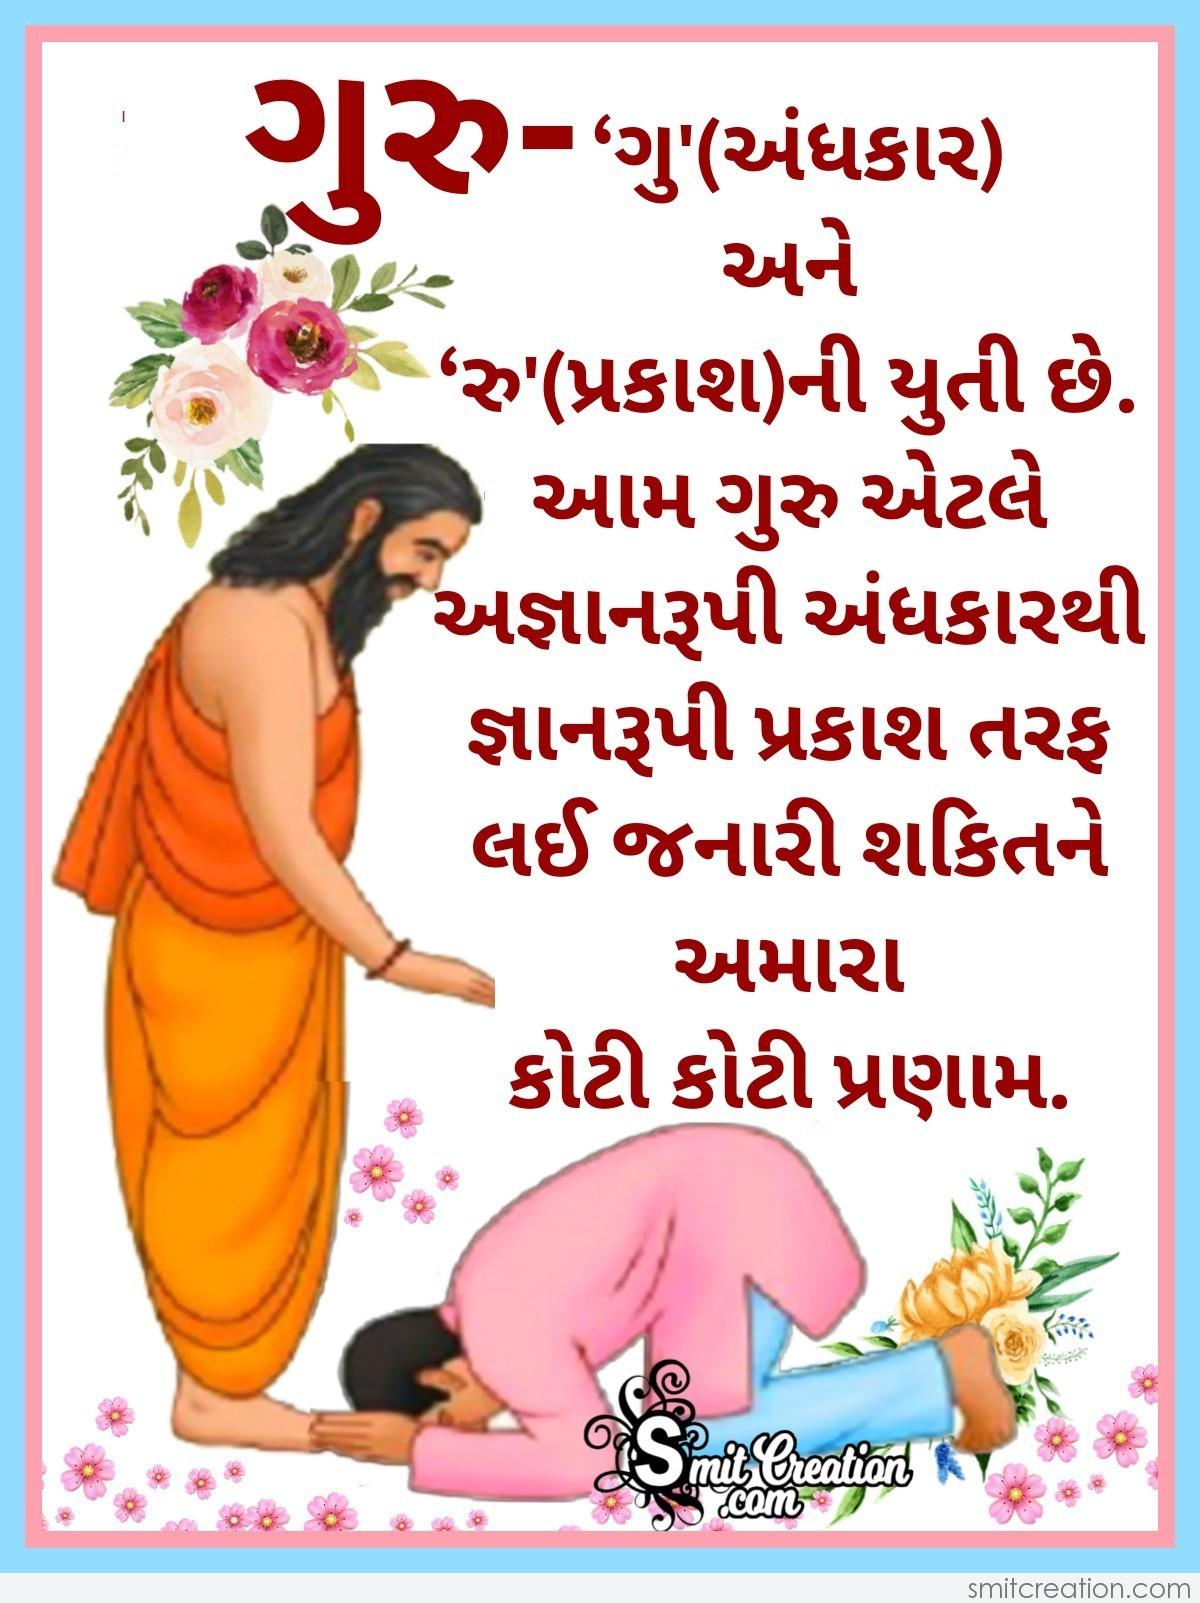 9 Guru Purnima Wishes in Gujarati - Pictures and Graphics for different